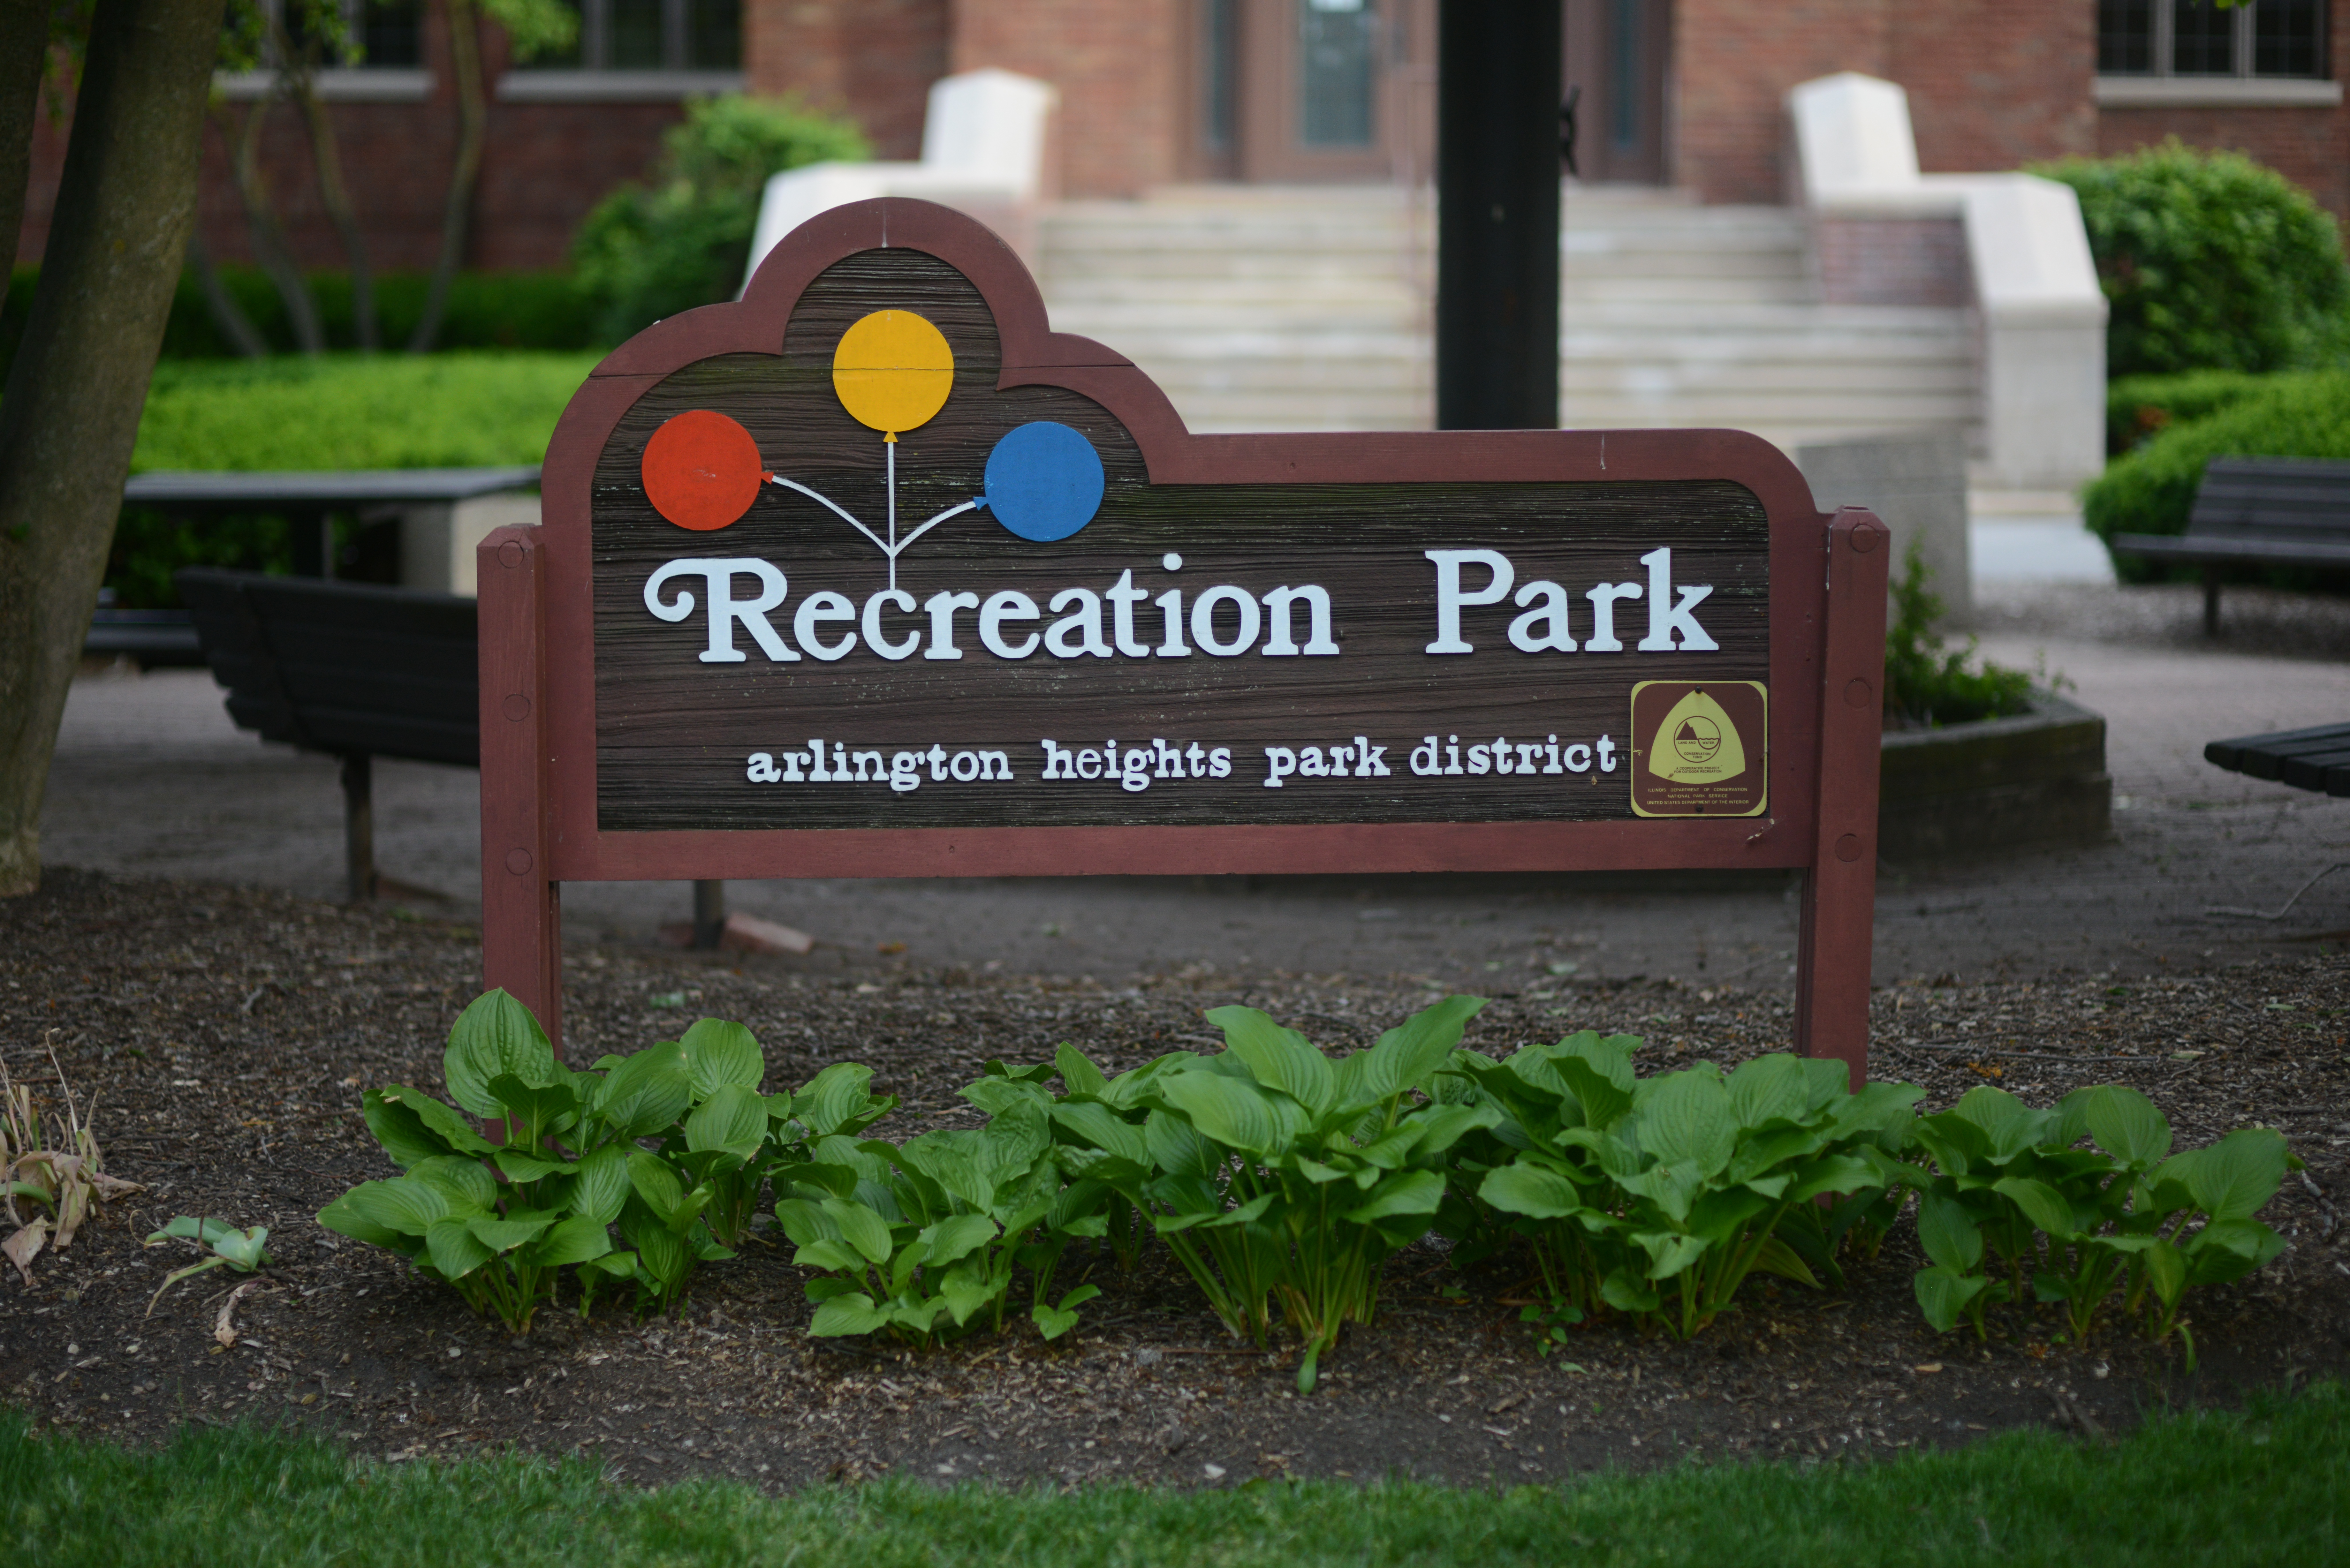 An outdoor sign for Recreation Park, Arlington Heights Park District.